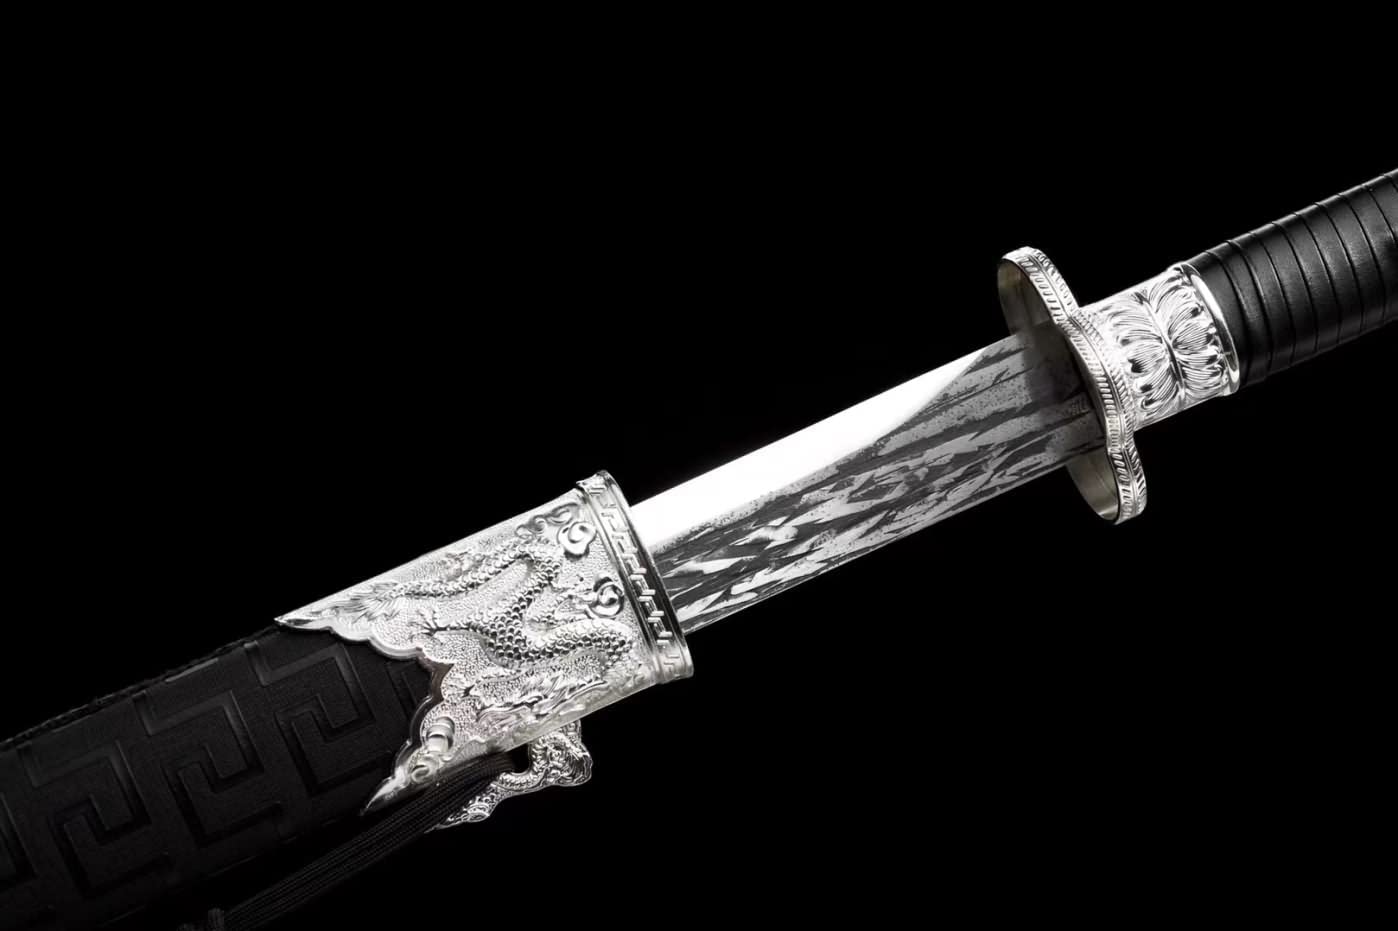 Saber swords Real High Carbon Steel Blade,Alloy Fittings,Solid Wood Scabbard,chinese sword